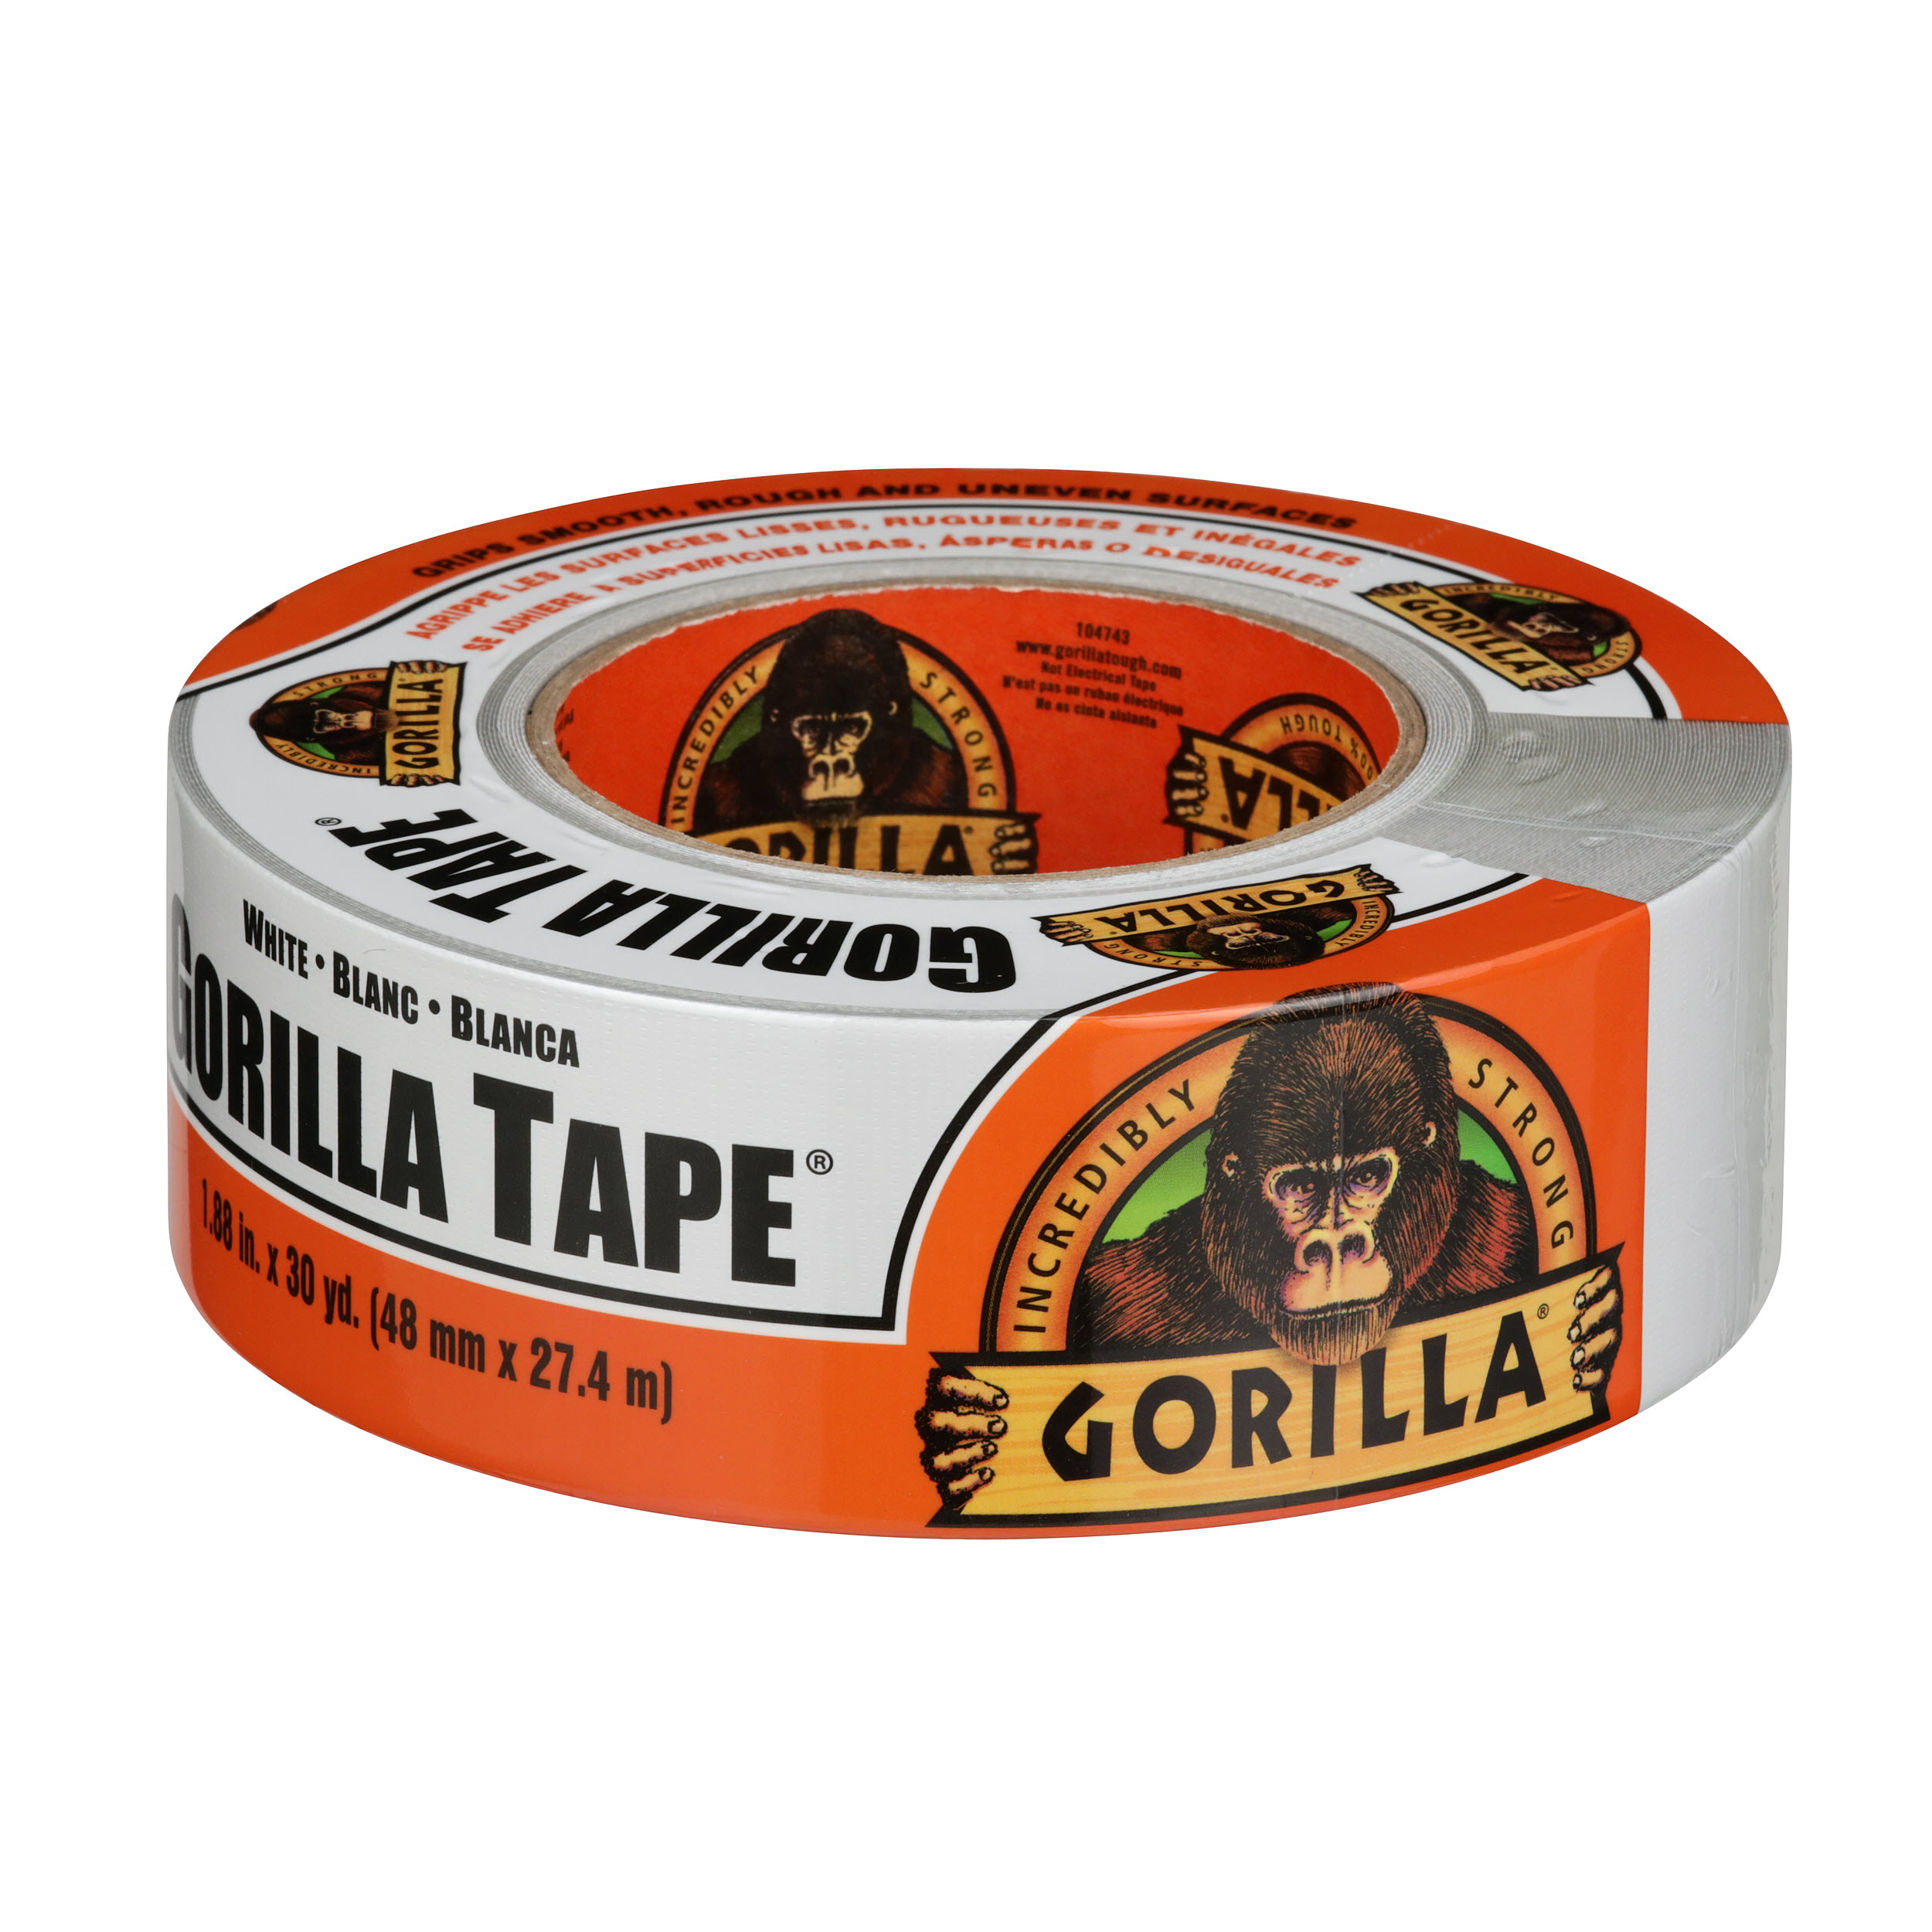 Gorilla Adhesive Repair Thick Duct Tape Roll Waterproof Heavy Duty White  30Yd